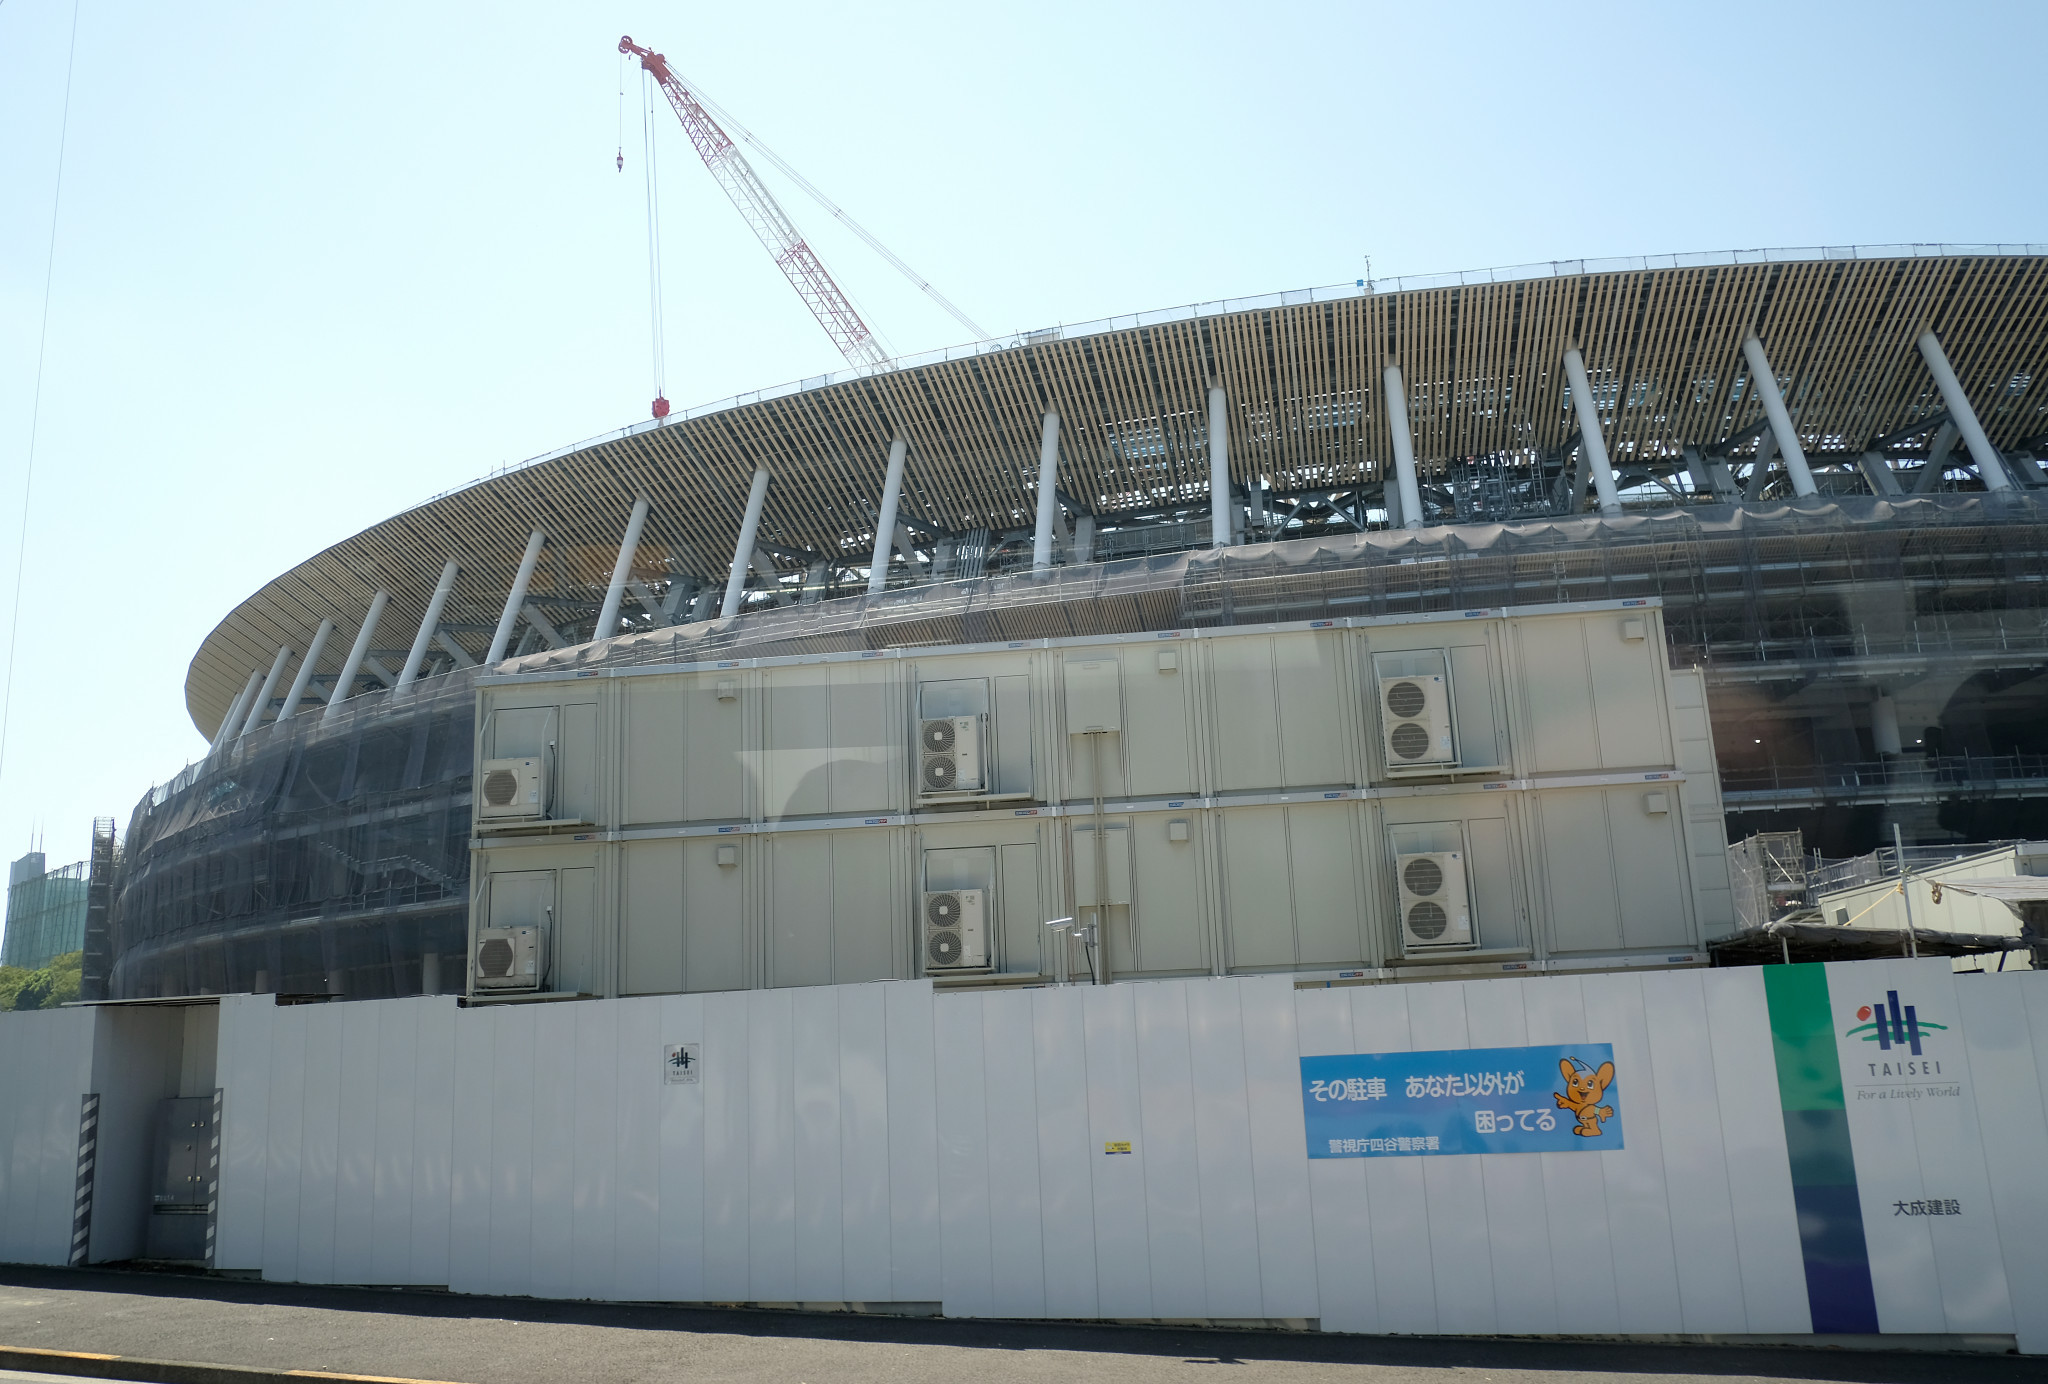 Tokyo 2020 Olympic Stadium to hold 68,000 fans